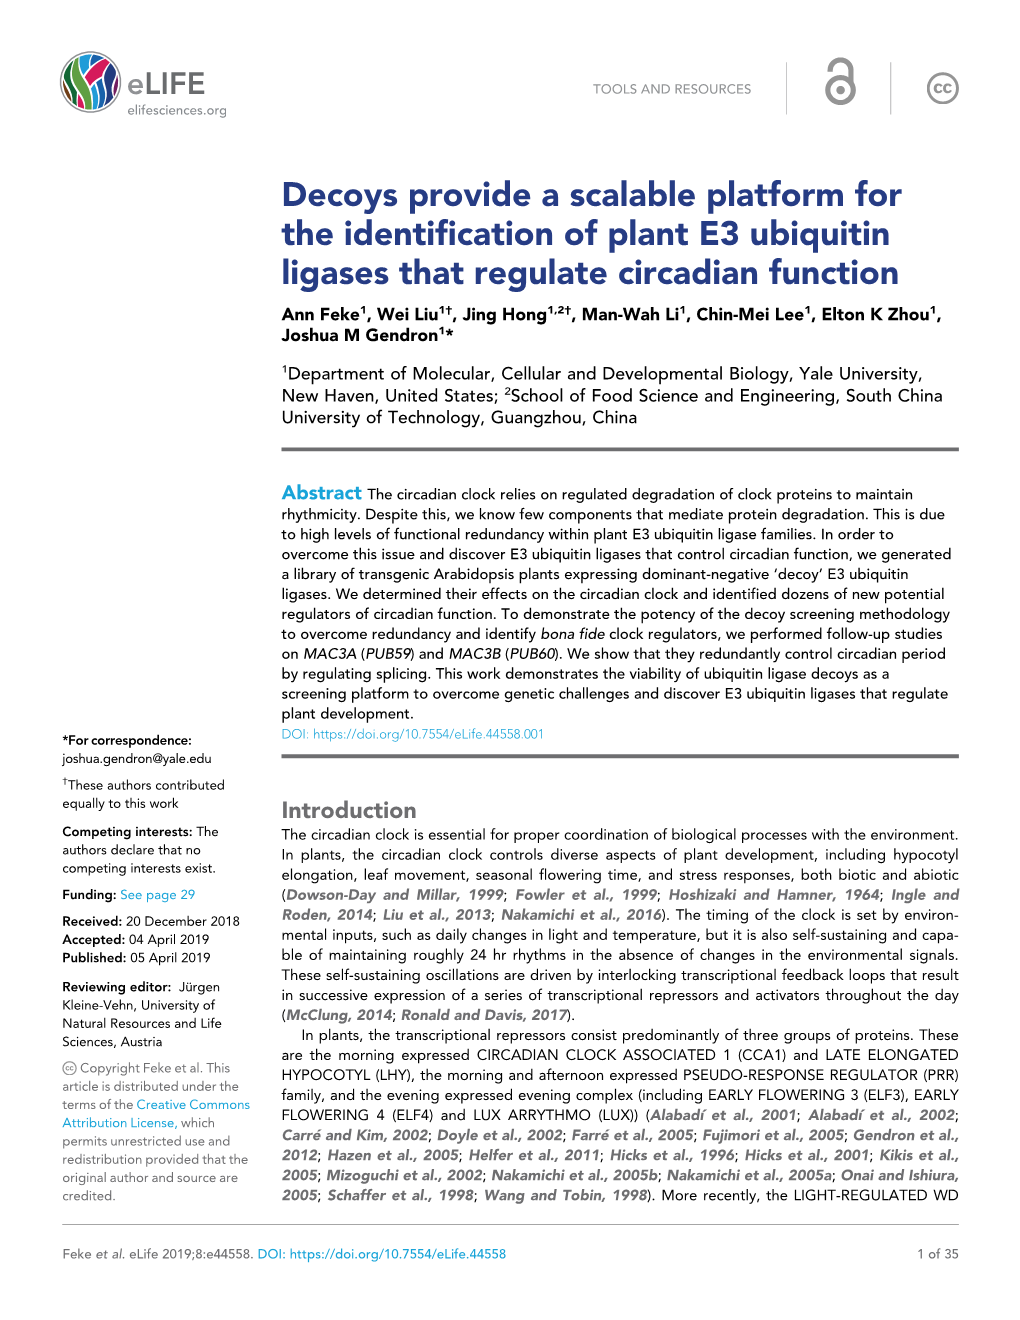 Decoys Provide a Scalable Platform for the Identification of Plant E3